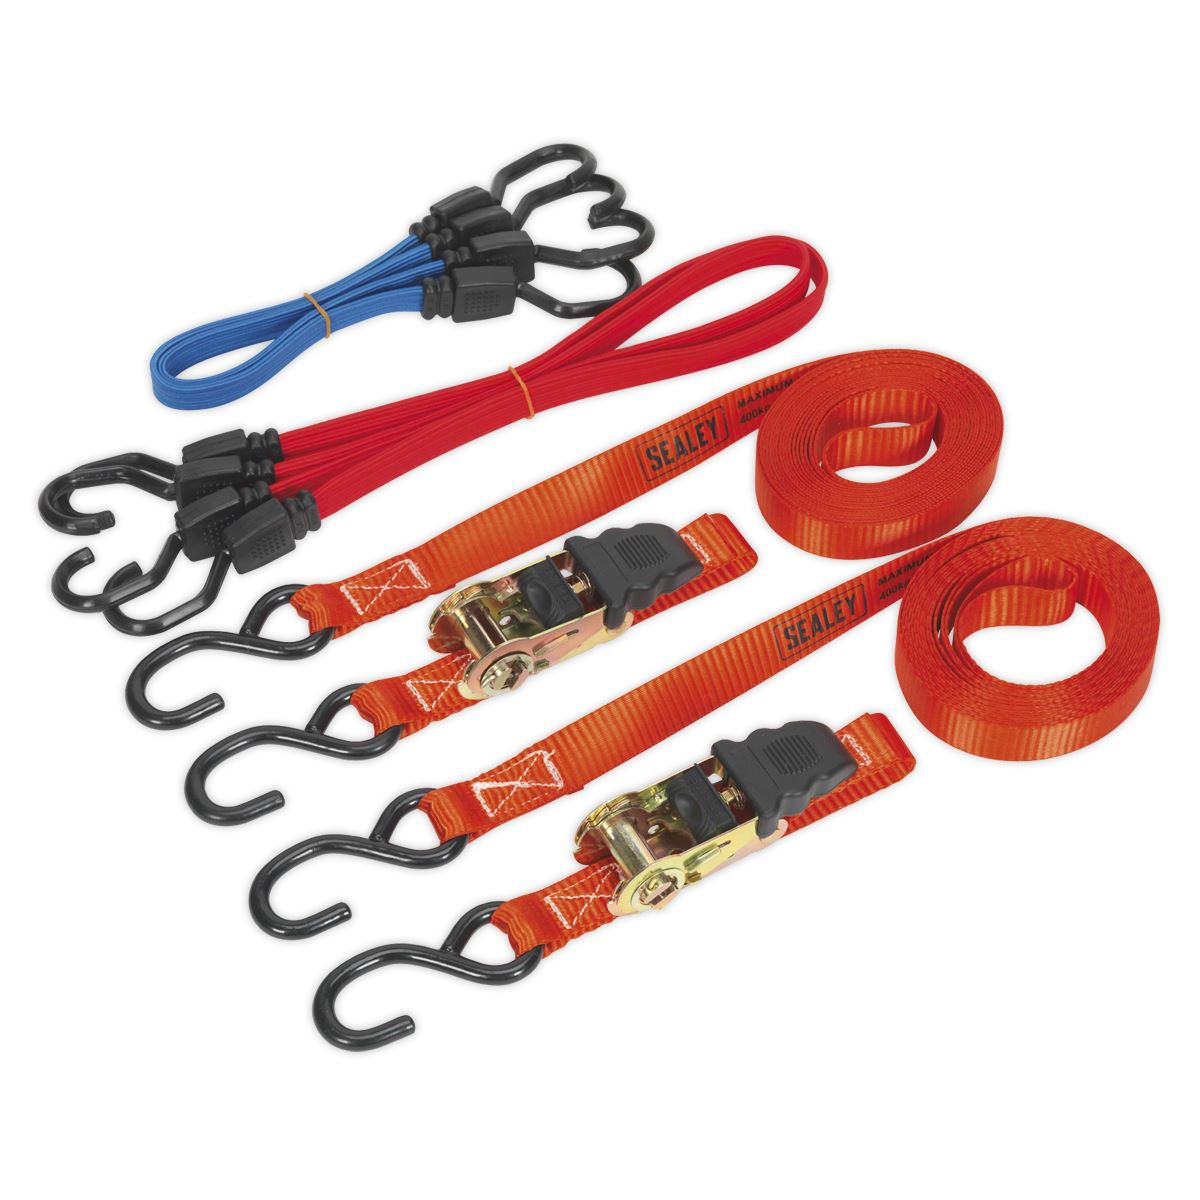 Sealey Ratchet Strap & Bungee Cord Set 6pc